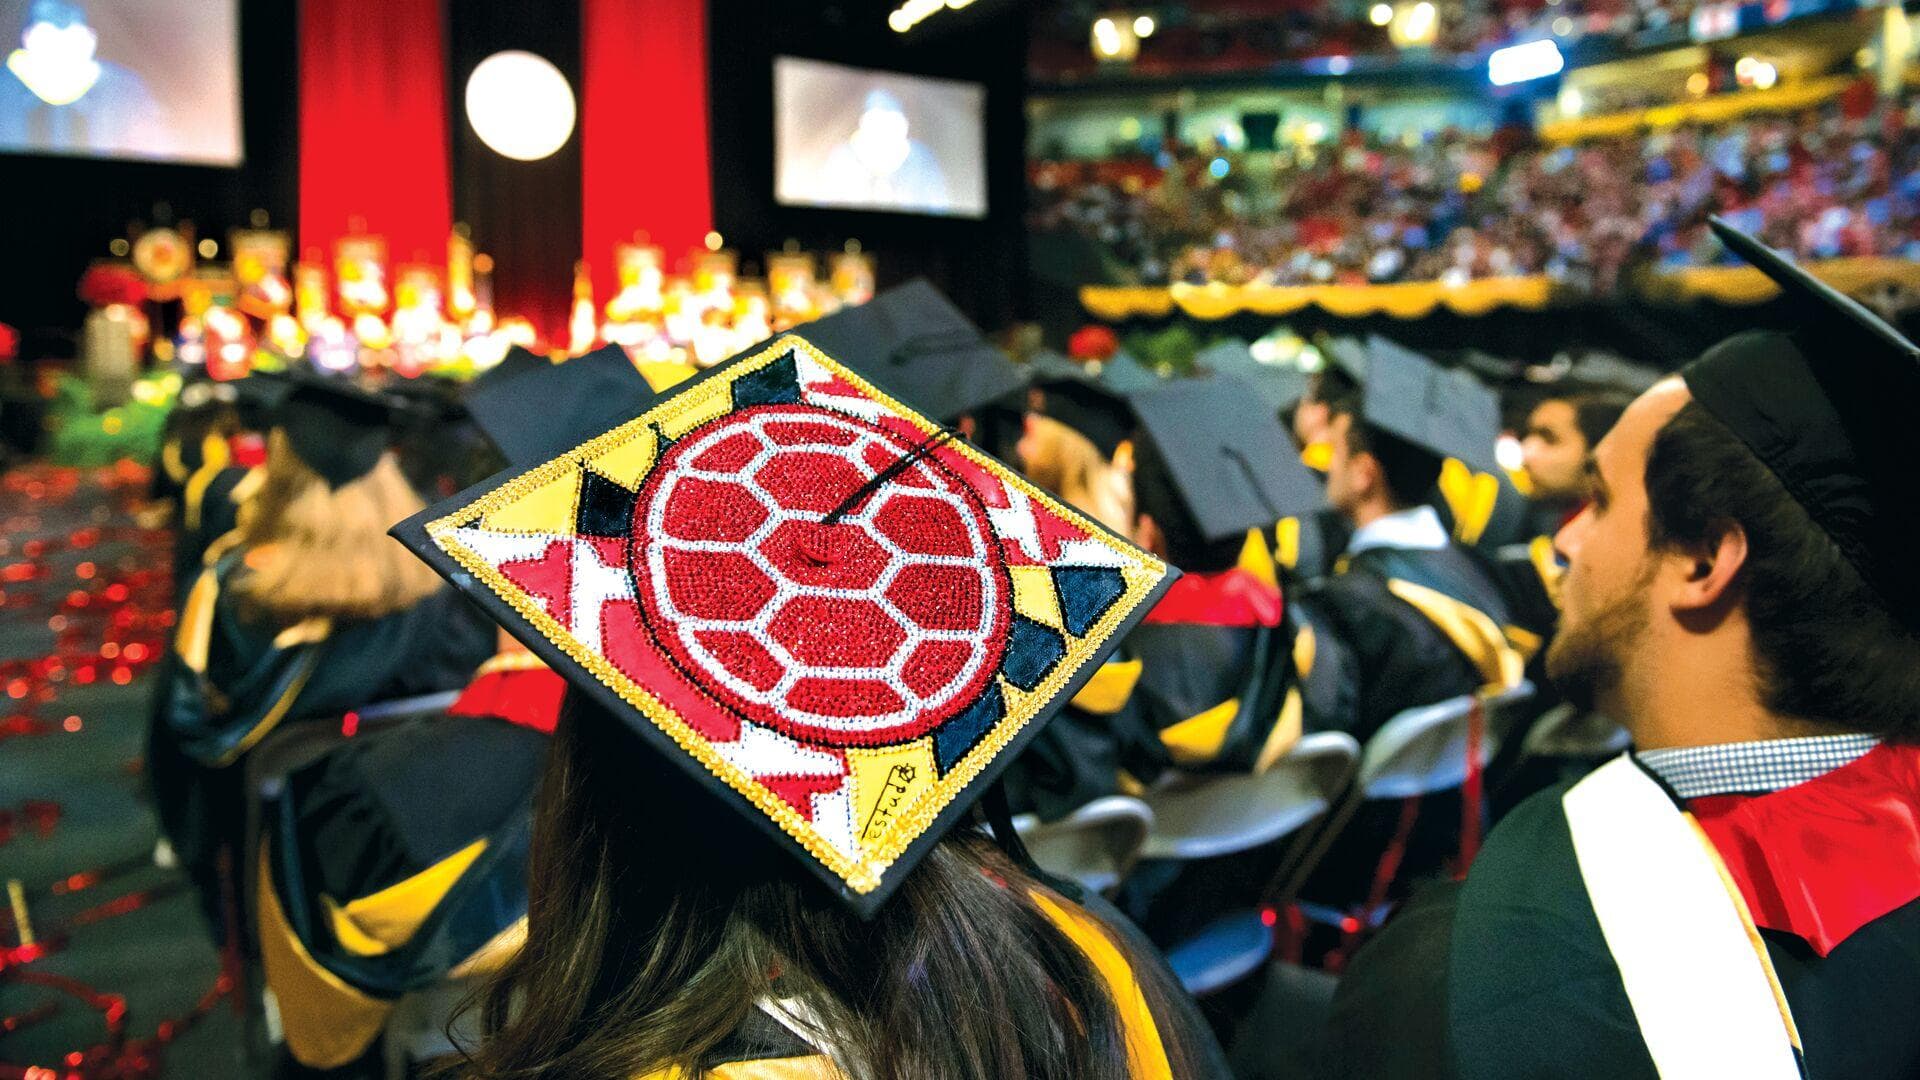 University of Maryland's Commencement, focused on a graduation cap bedazzled in the Maryland colors of Black Gold, Red and White depicting the Red Shell logo of Testudo